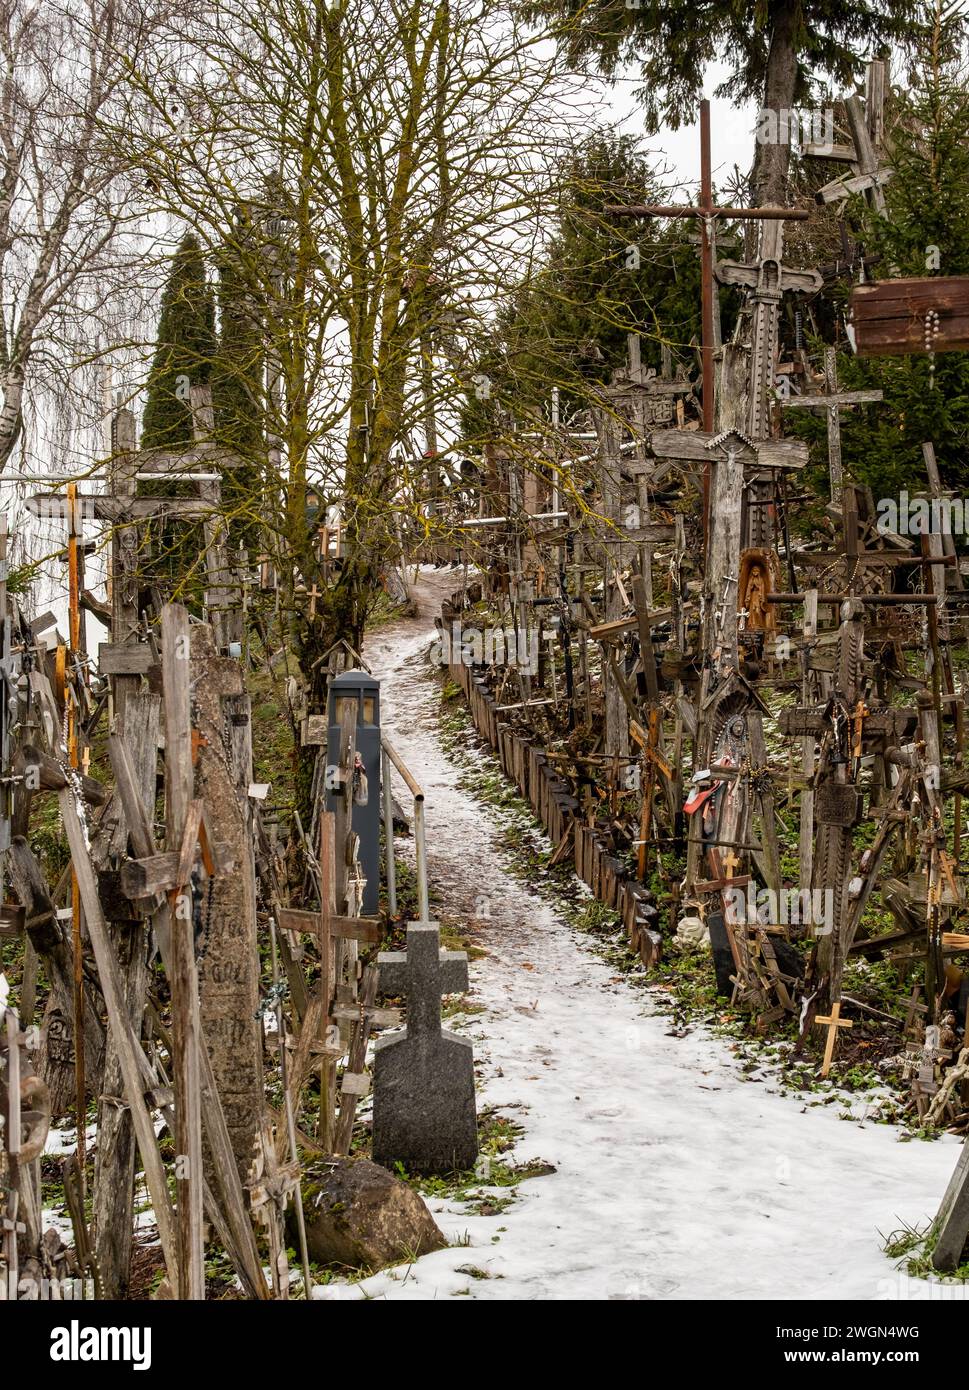 Lithuania's Hill of Crosses is a place of pilgrimage and prayer, where visitors come to seek blessings and offer their supplications. Stock Photo